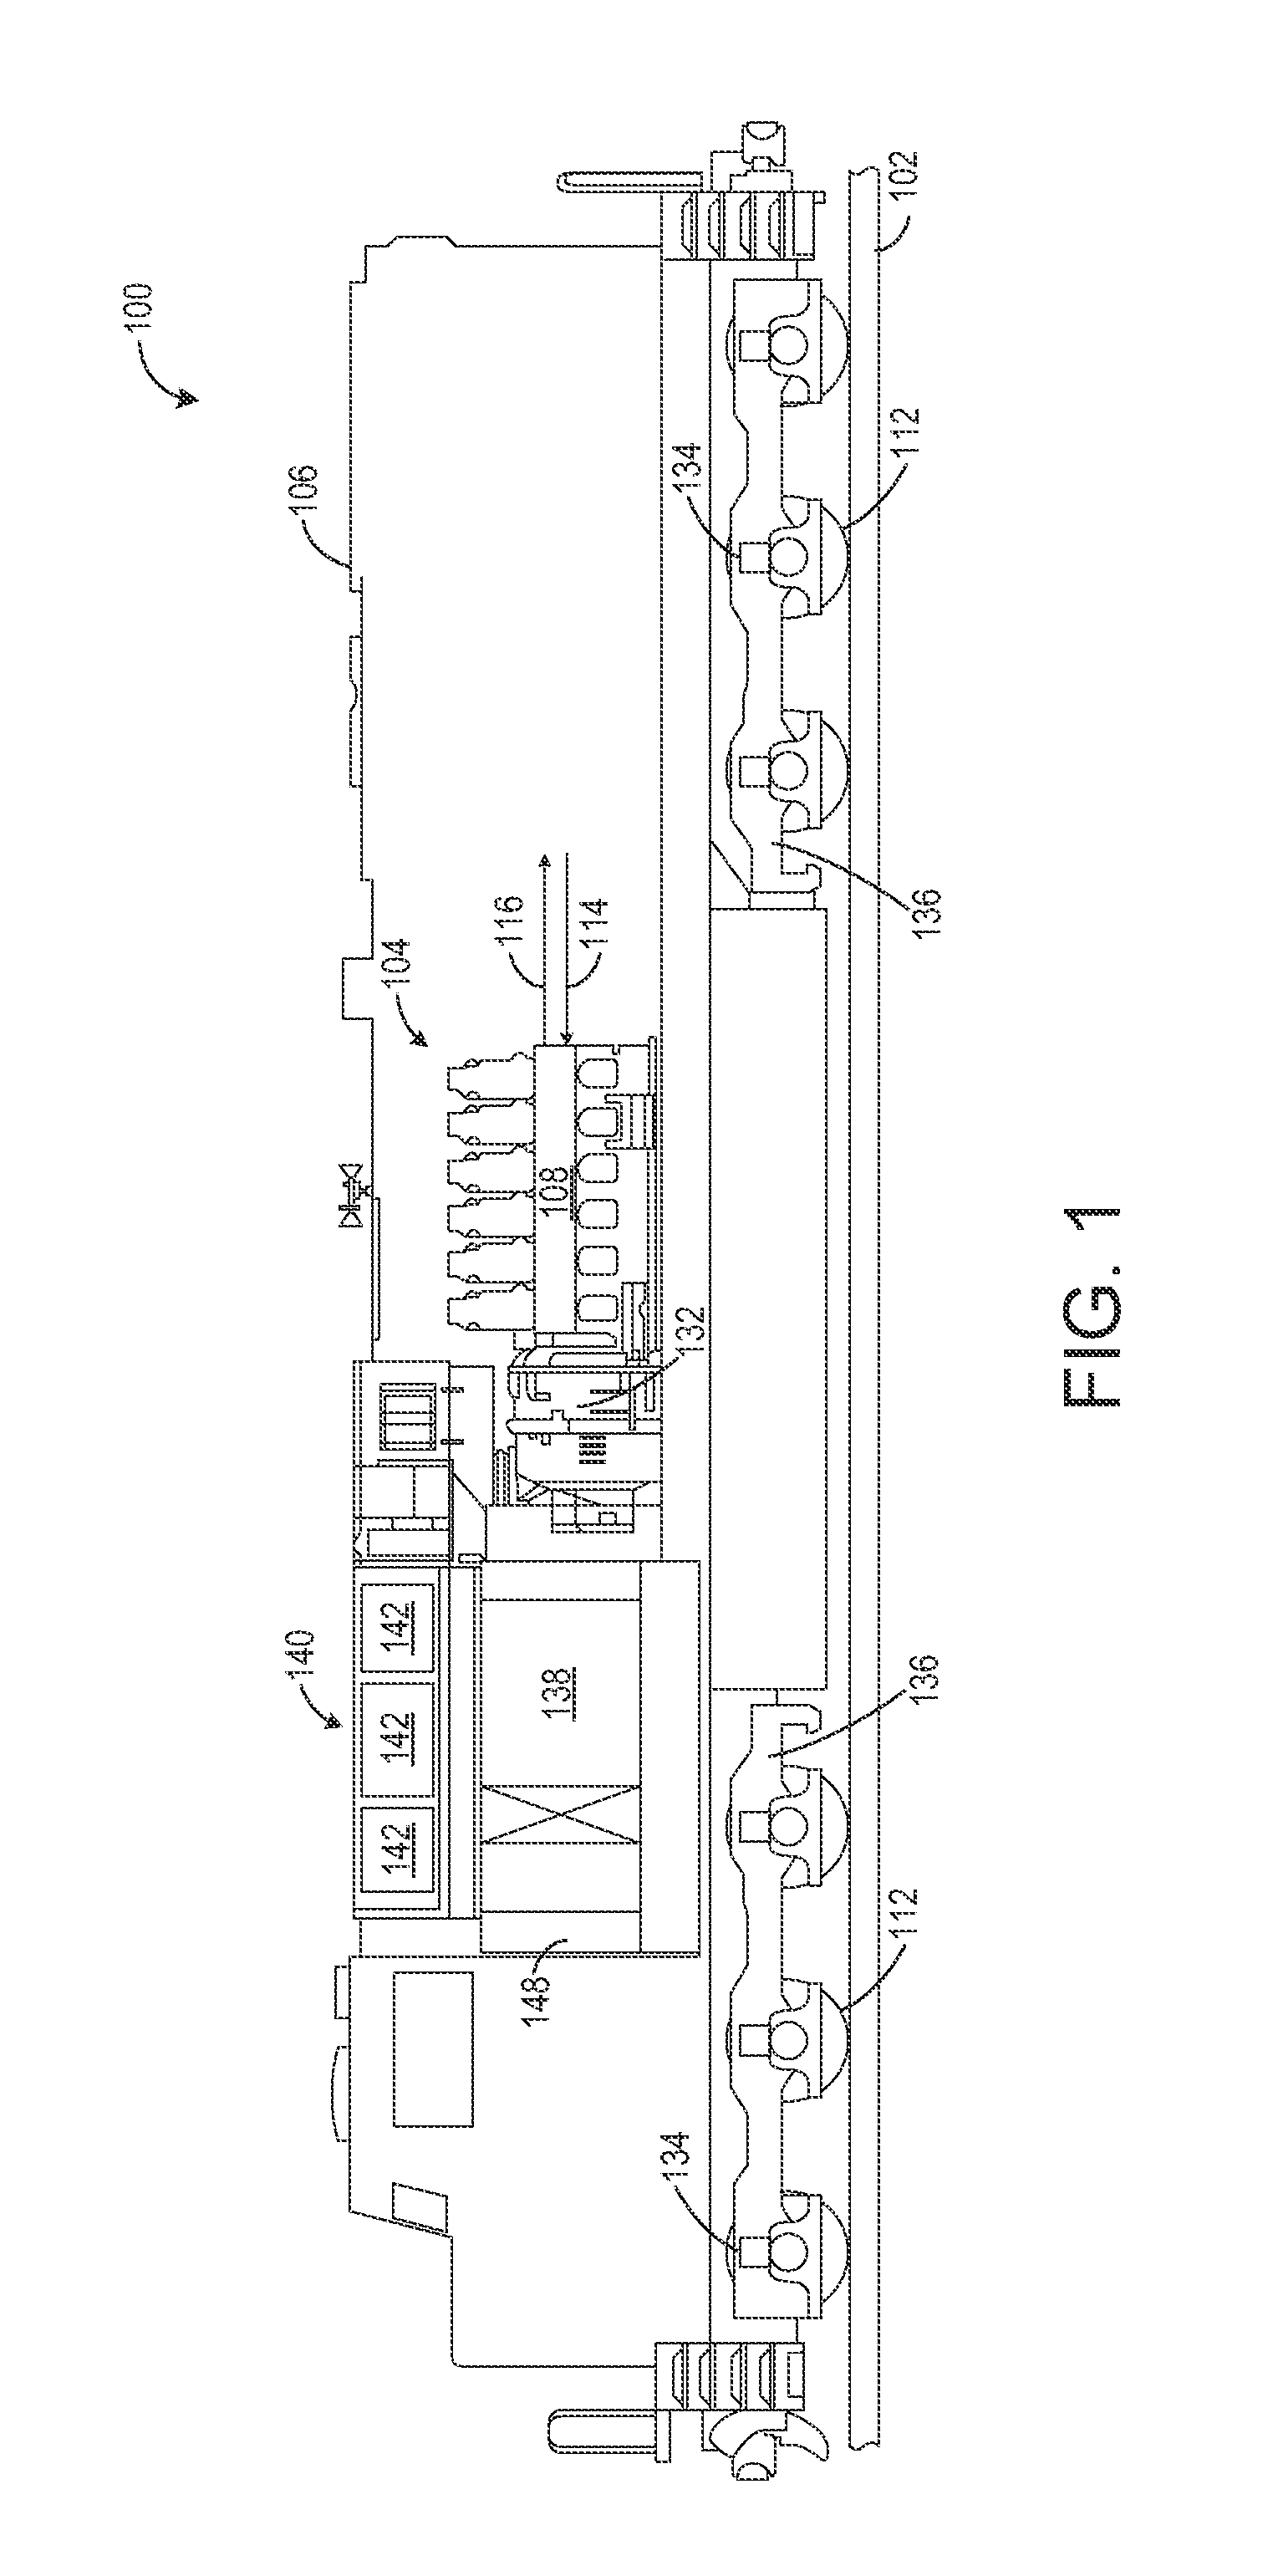 Methods and systems for cooling in a vehicle